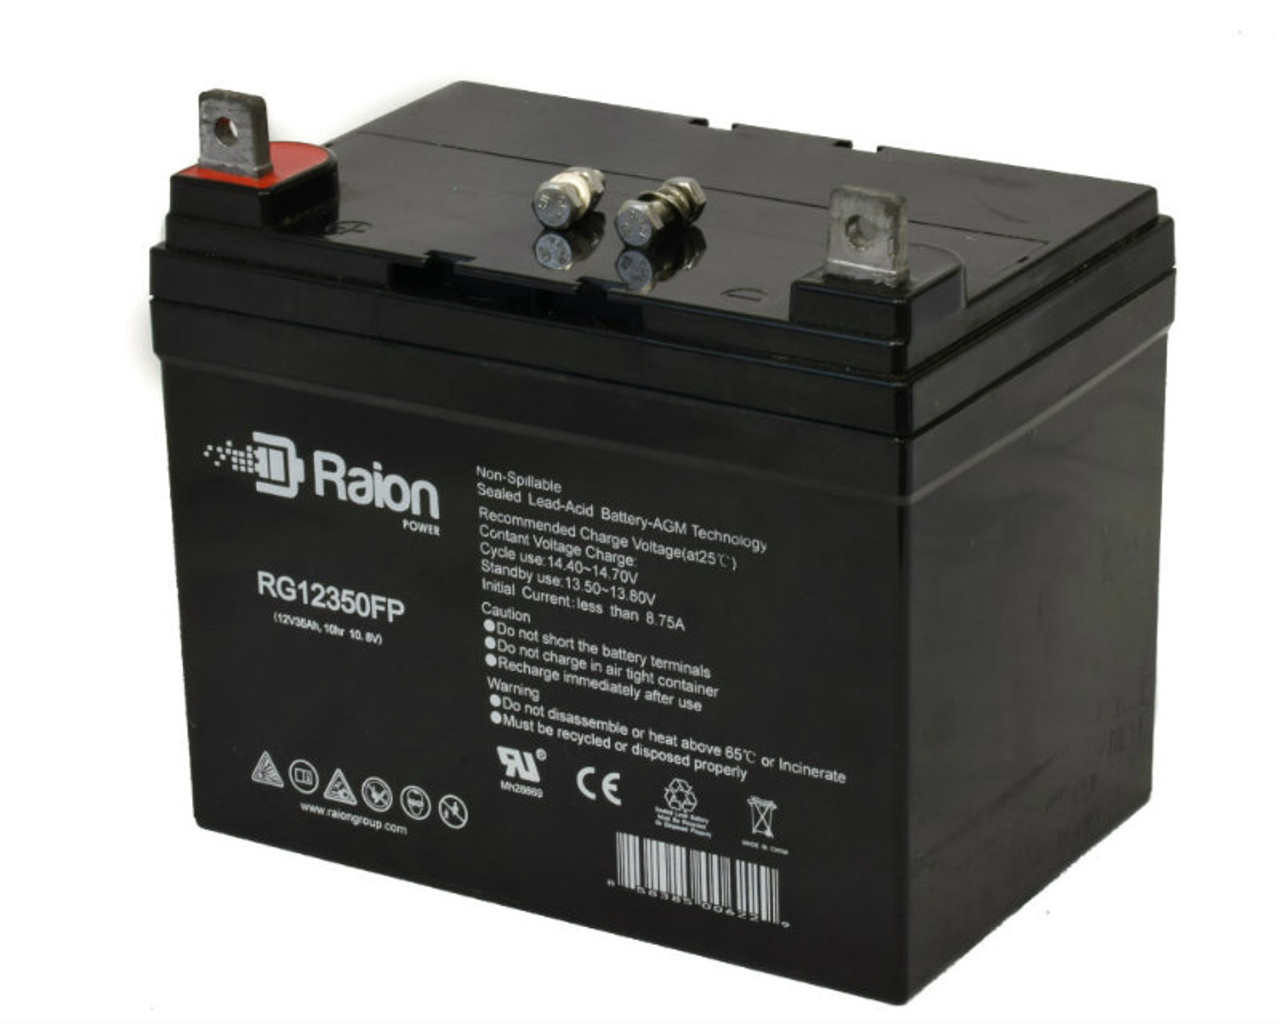 Raion Power Replacement 12V 35Ah RG12350FP Mobility Scooter Battery for Invacare Pronto R2 250 series